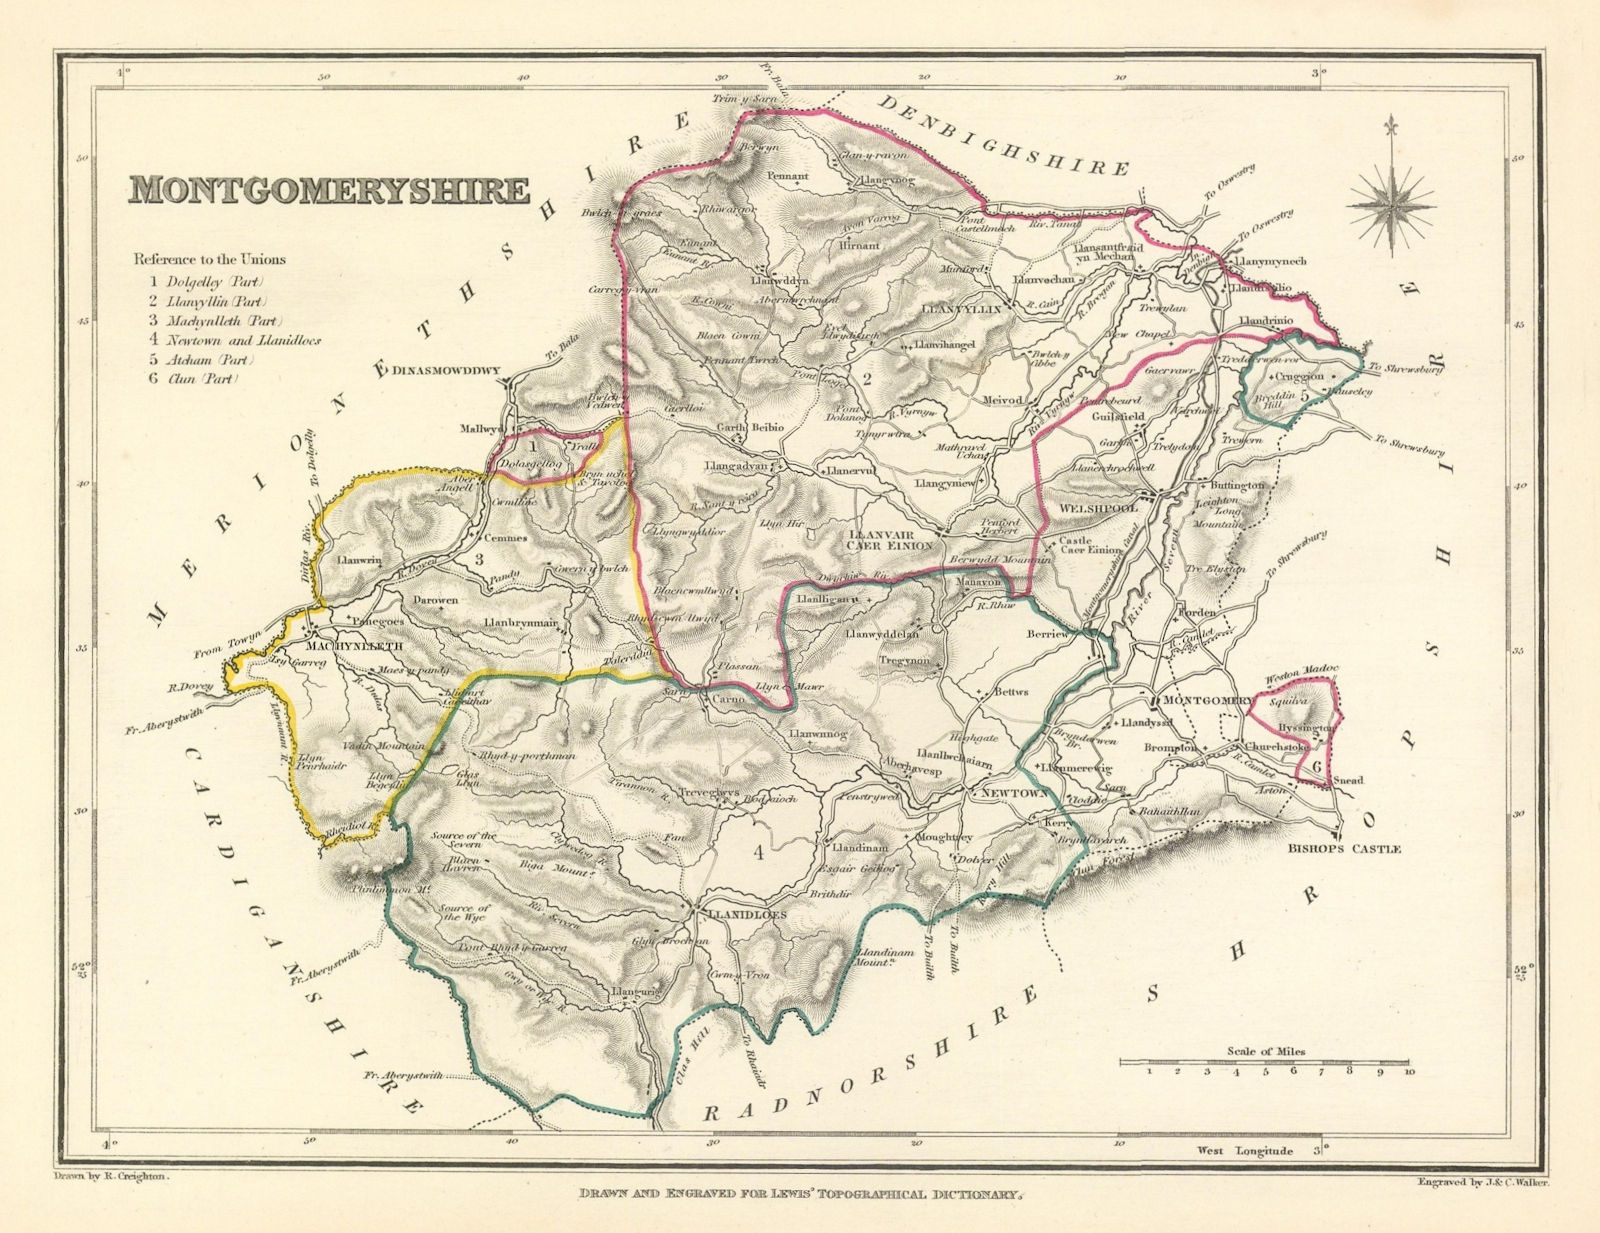 Associate Product Antique county map of MONTGOMERYSHIRE by Creighton & Walker for Lewis c1840